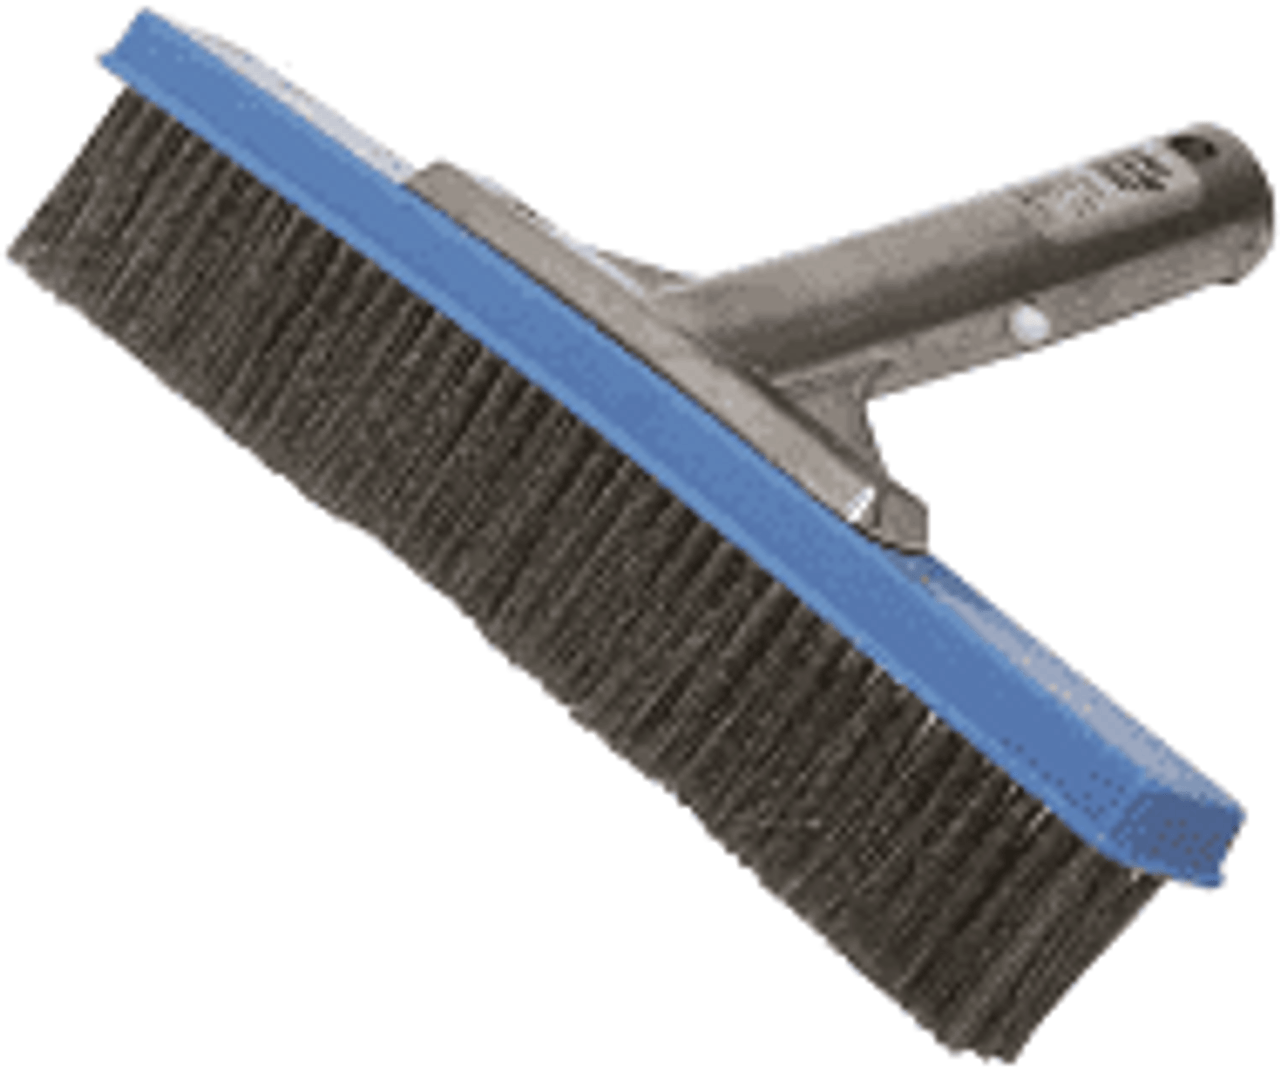 Stainless-Steel 10 Bristle Brush for Cleaning Pool Algae, pole